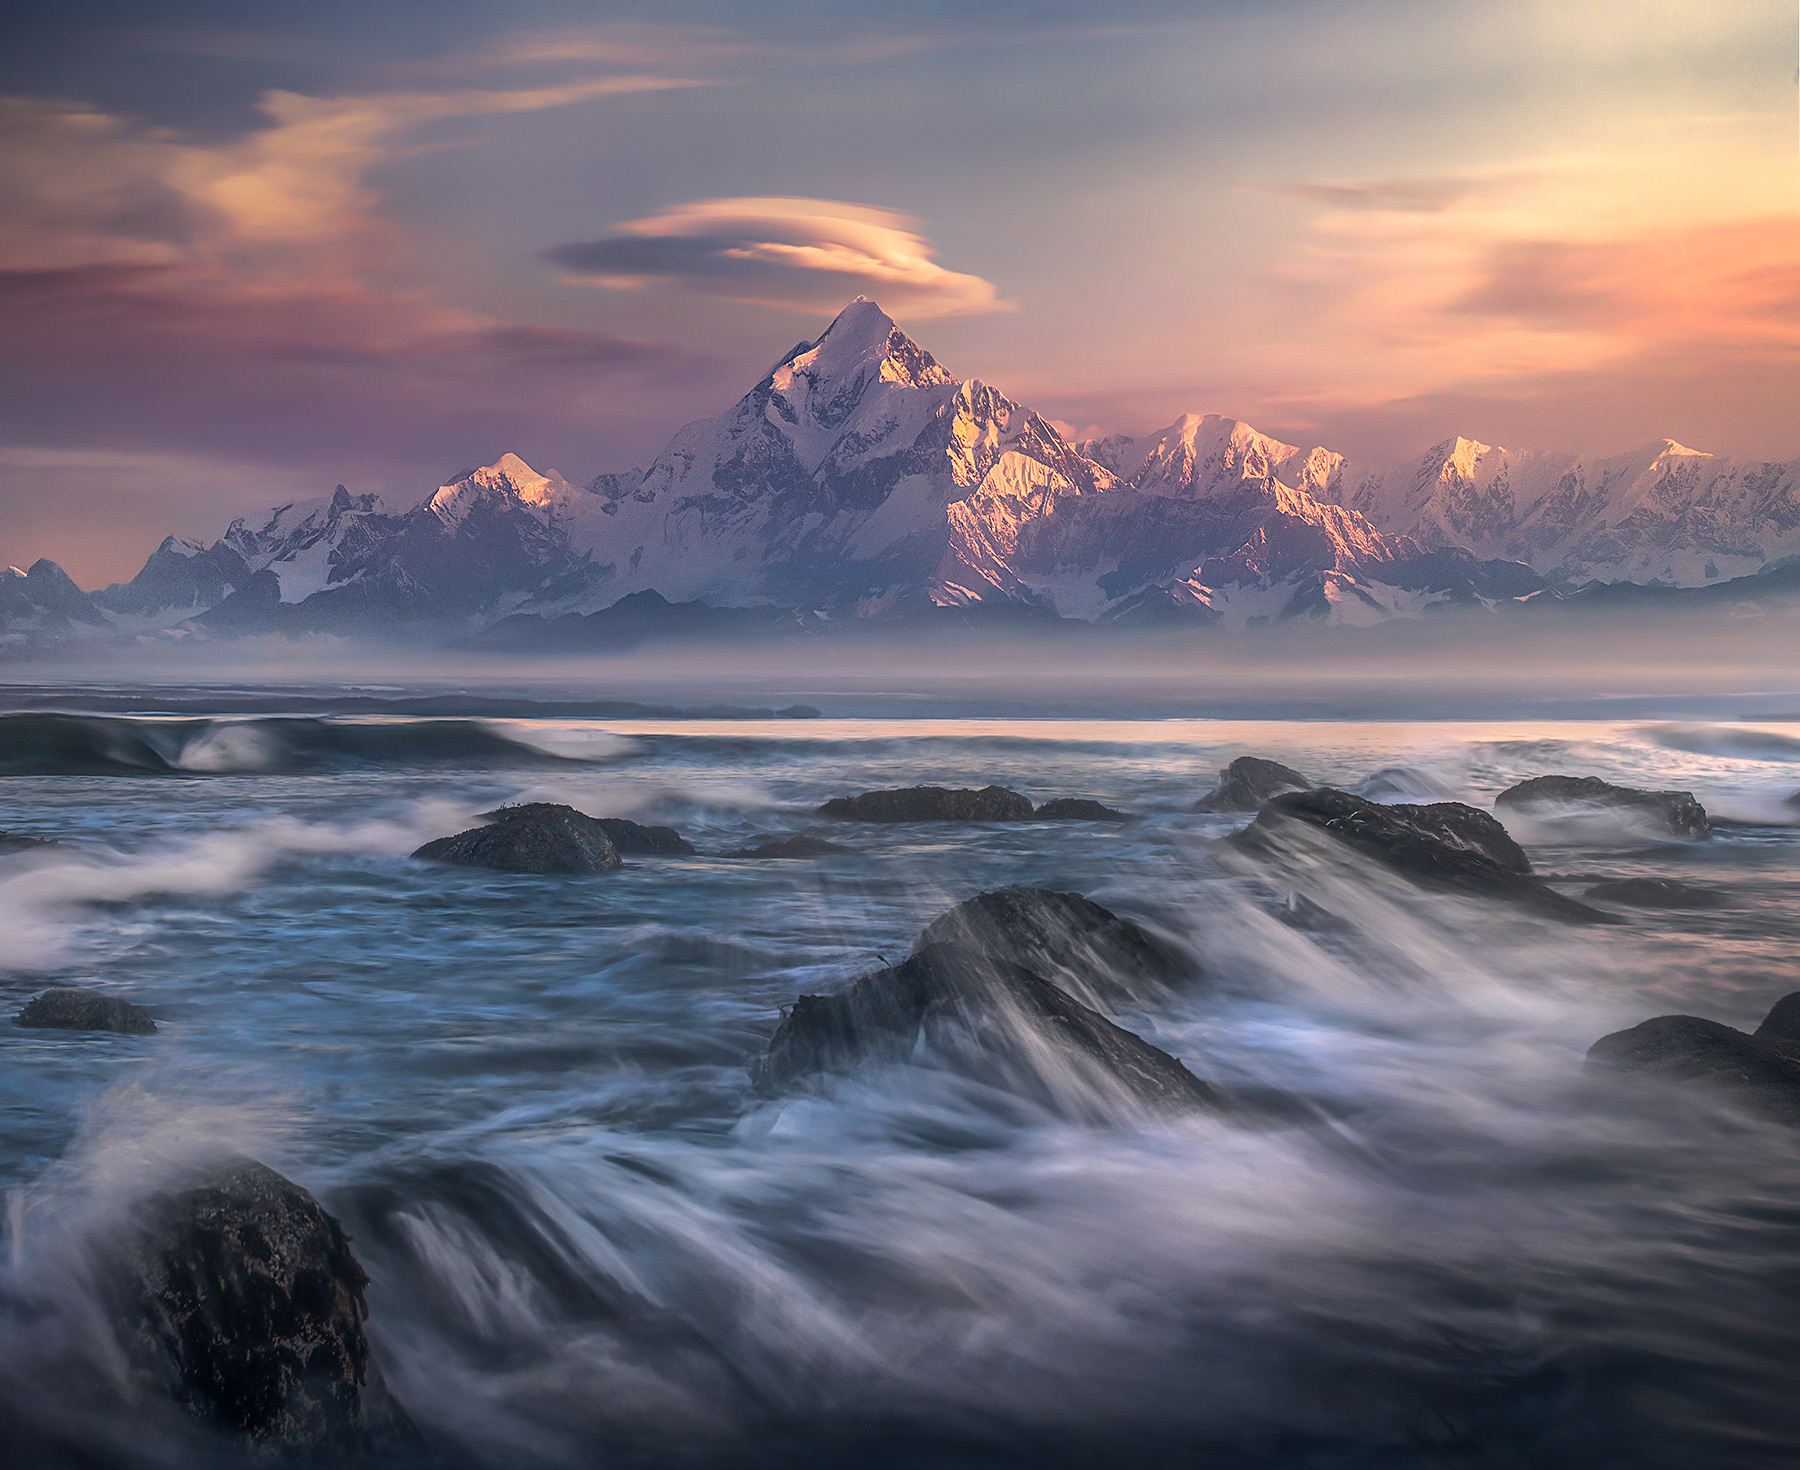 The great Mt St Elias rises over eighteen thousand feet above crashing surf in Alaska, some of the greatest vertical relief in...